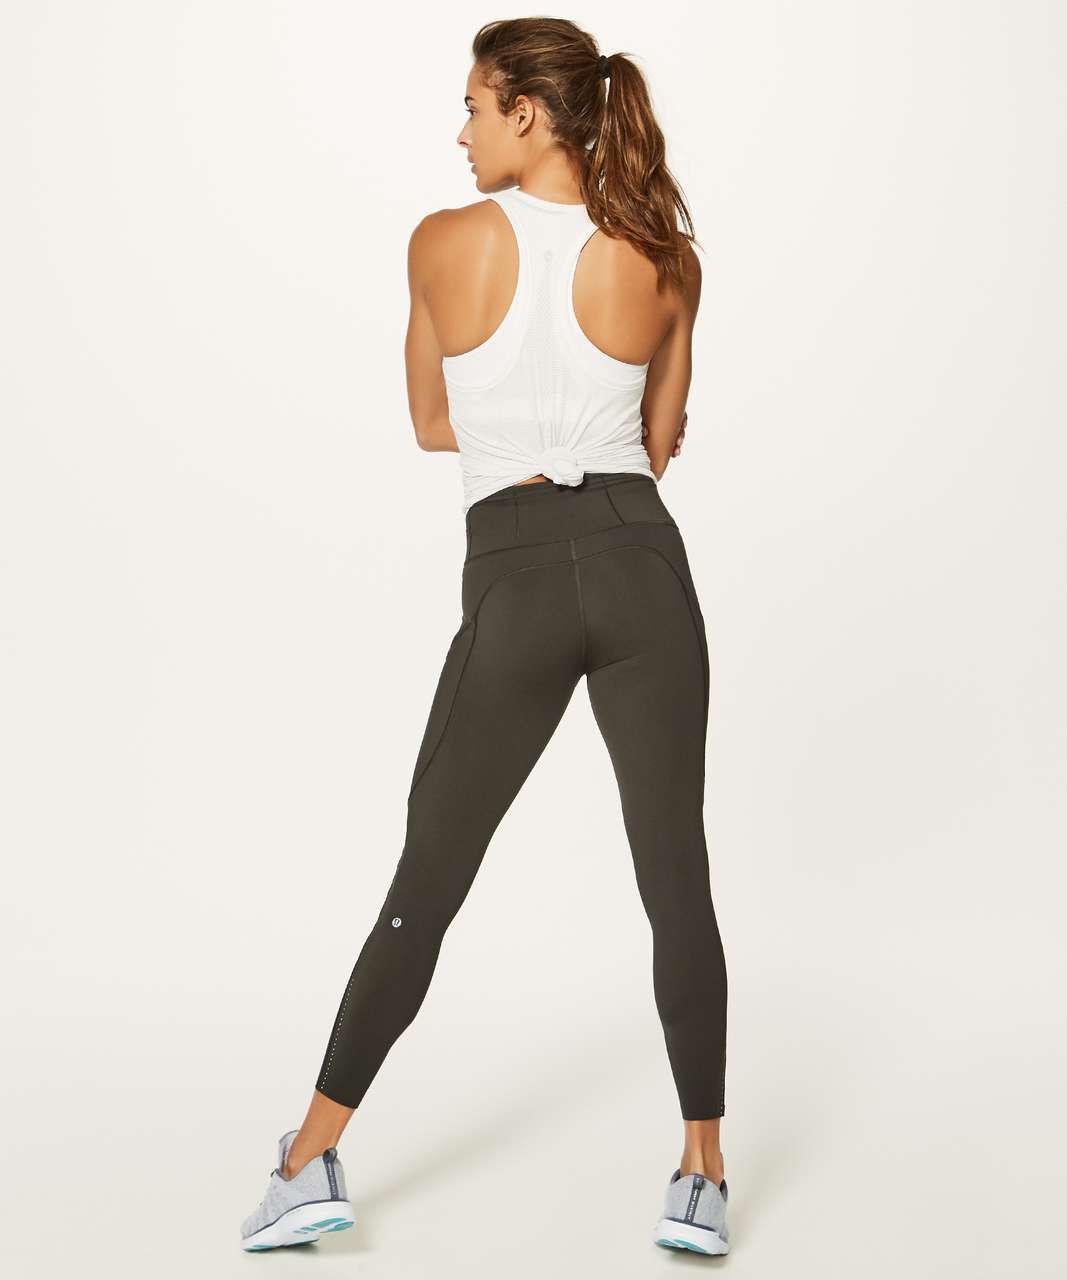 Lululemon Fast & Free 7/8 Tight II *Nulux 25" - Dark Olive (First Release)